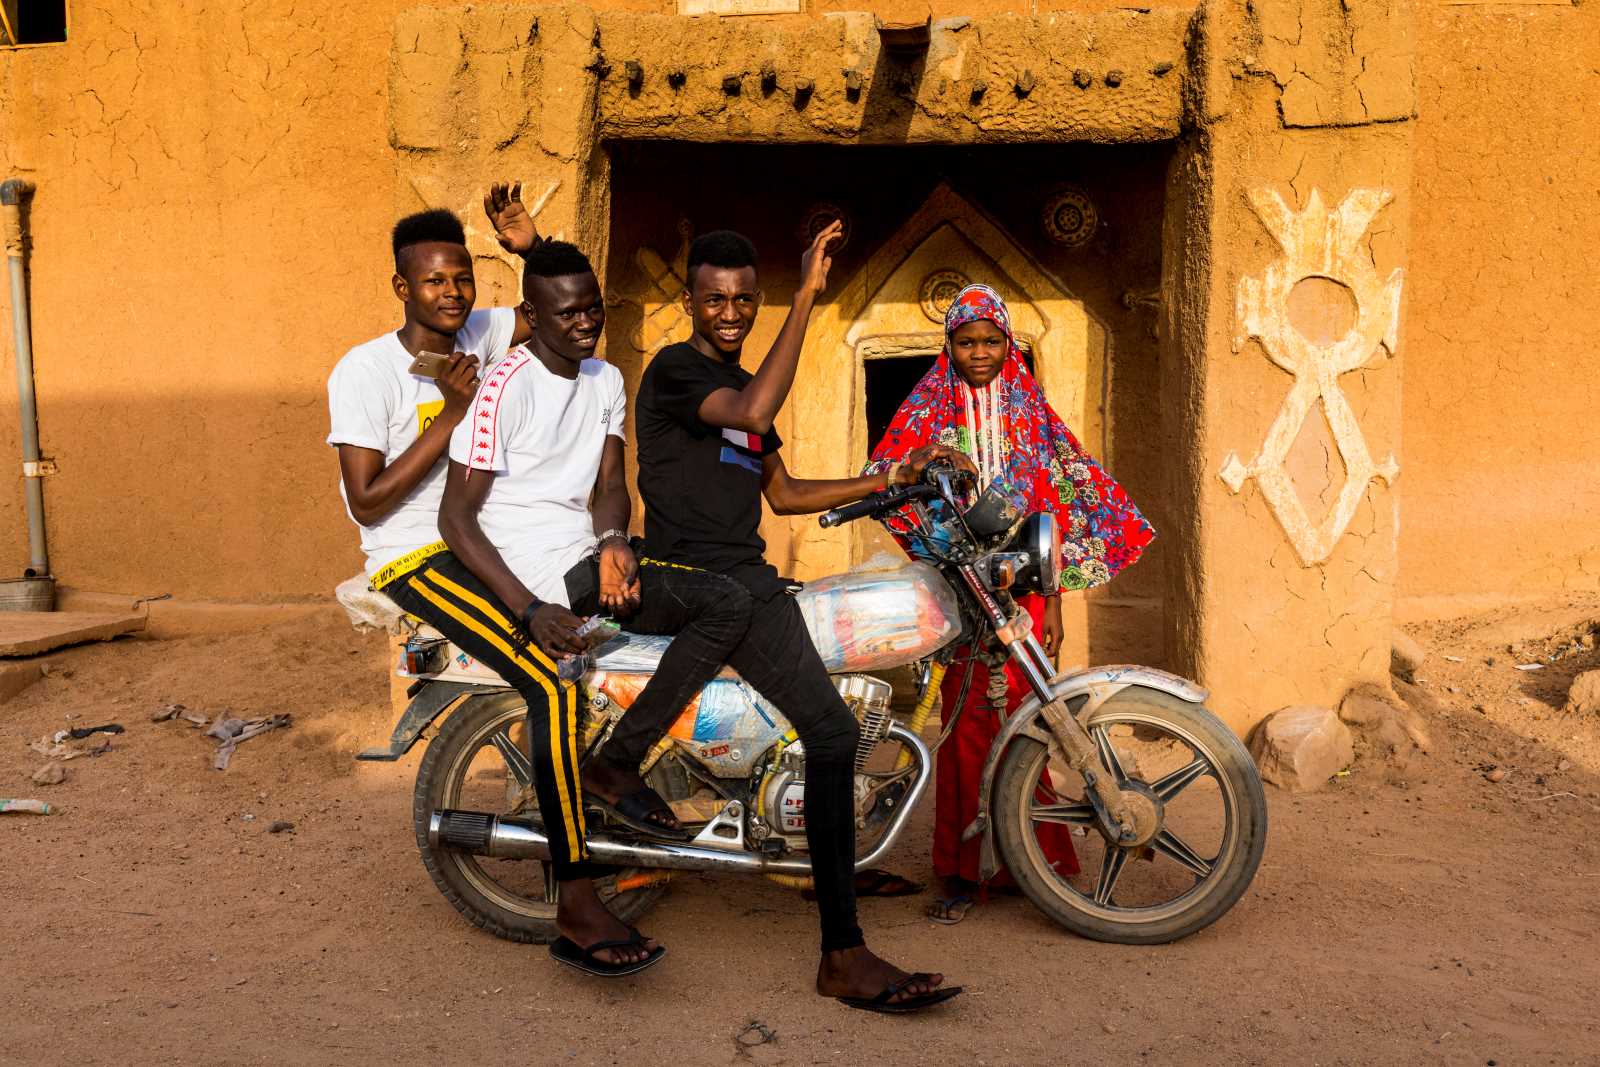 Young people in Niger. The country has one of the youngest populations in the world.